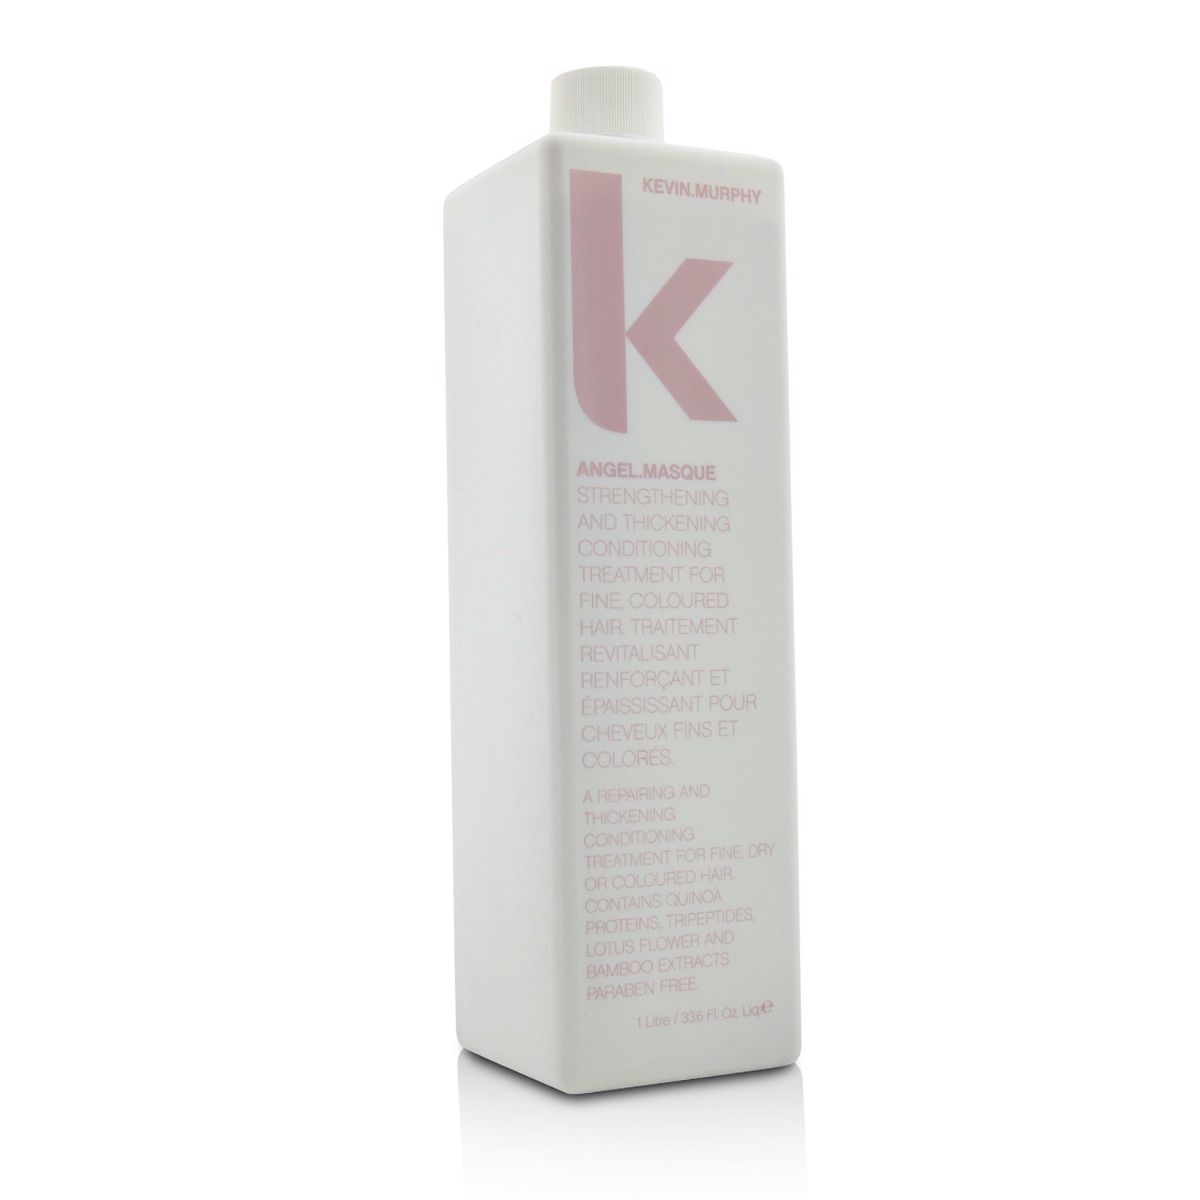 Angel.Masque (Strenghening and Thickening Conditioning Treatment - For Fine Coloured Hair) Kevin.Murphy Image